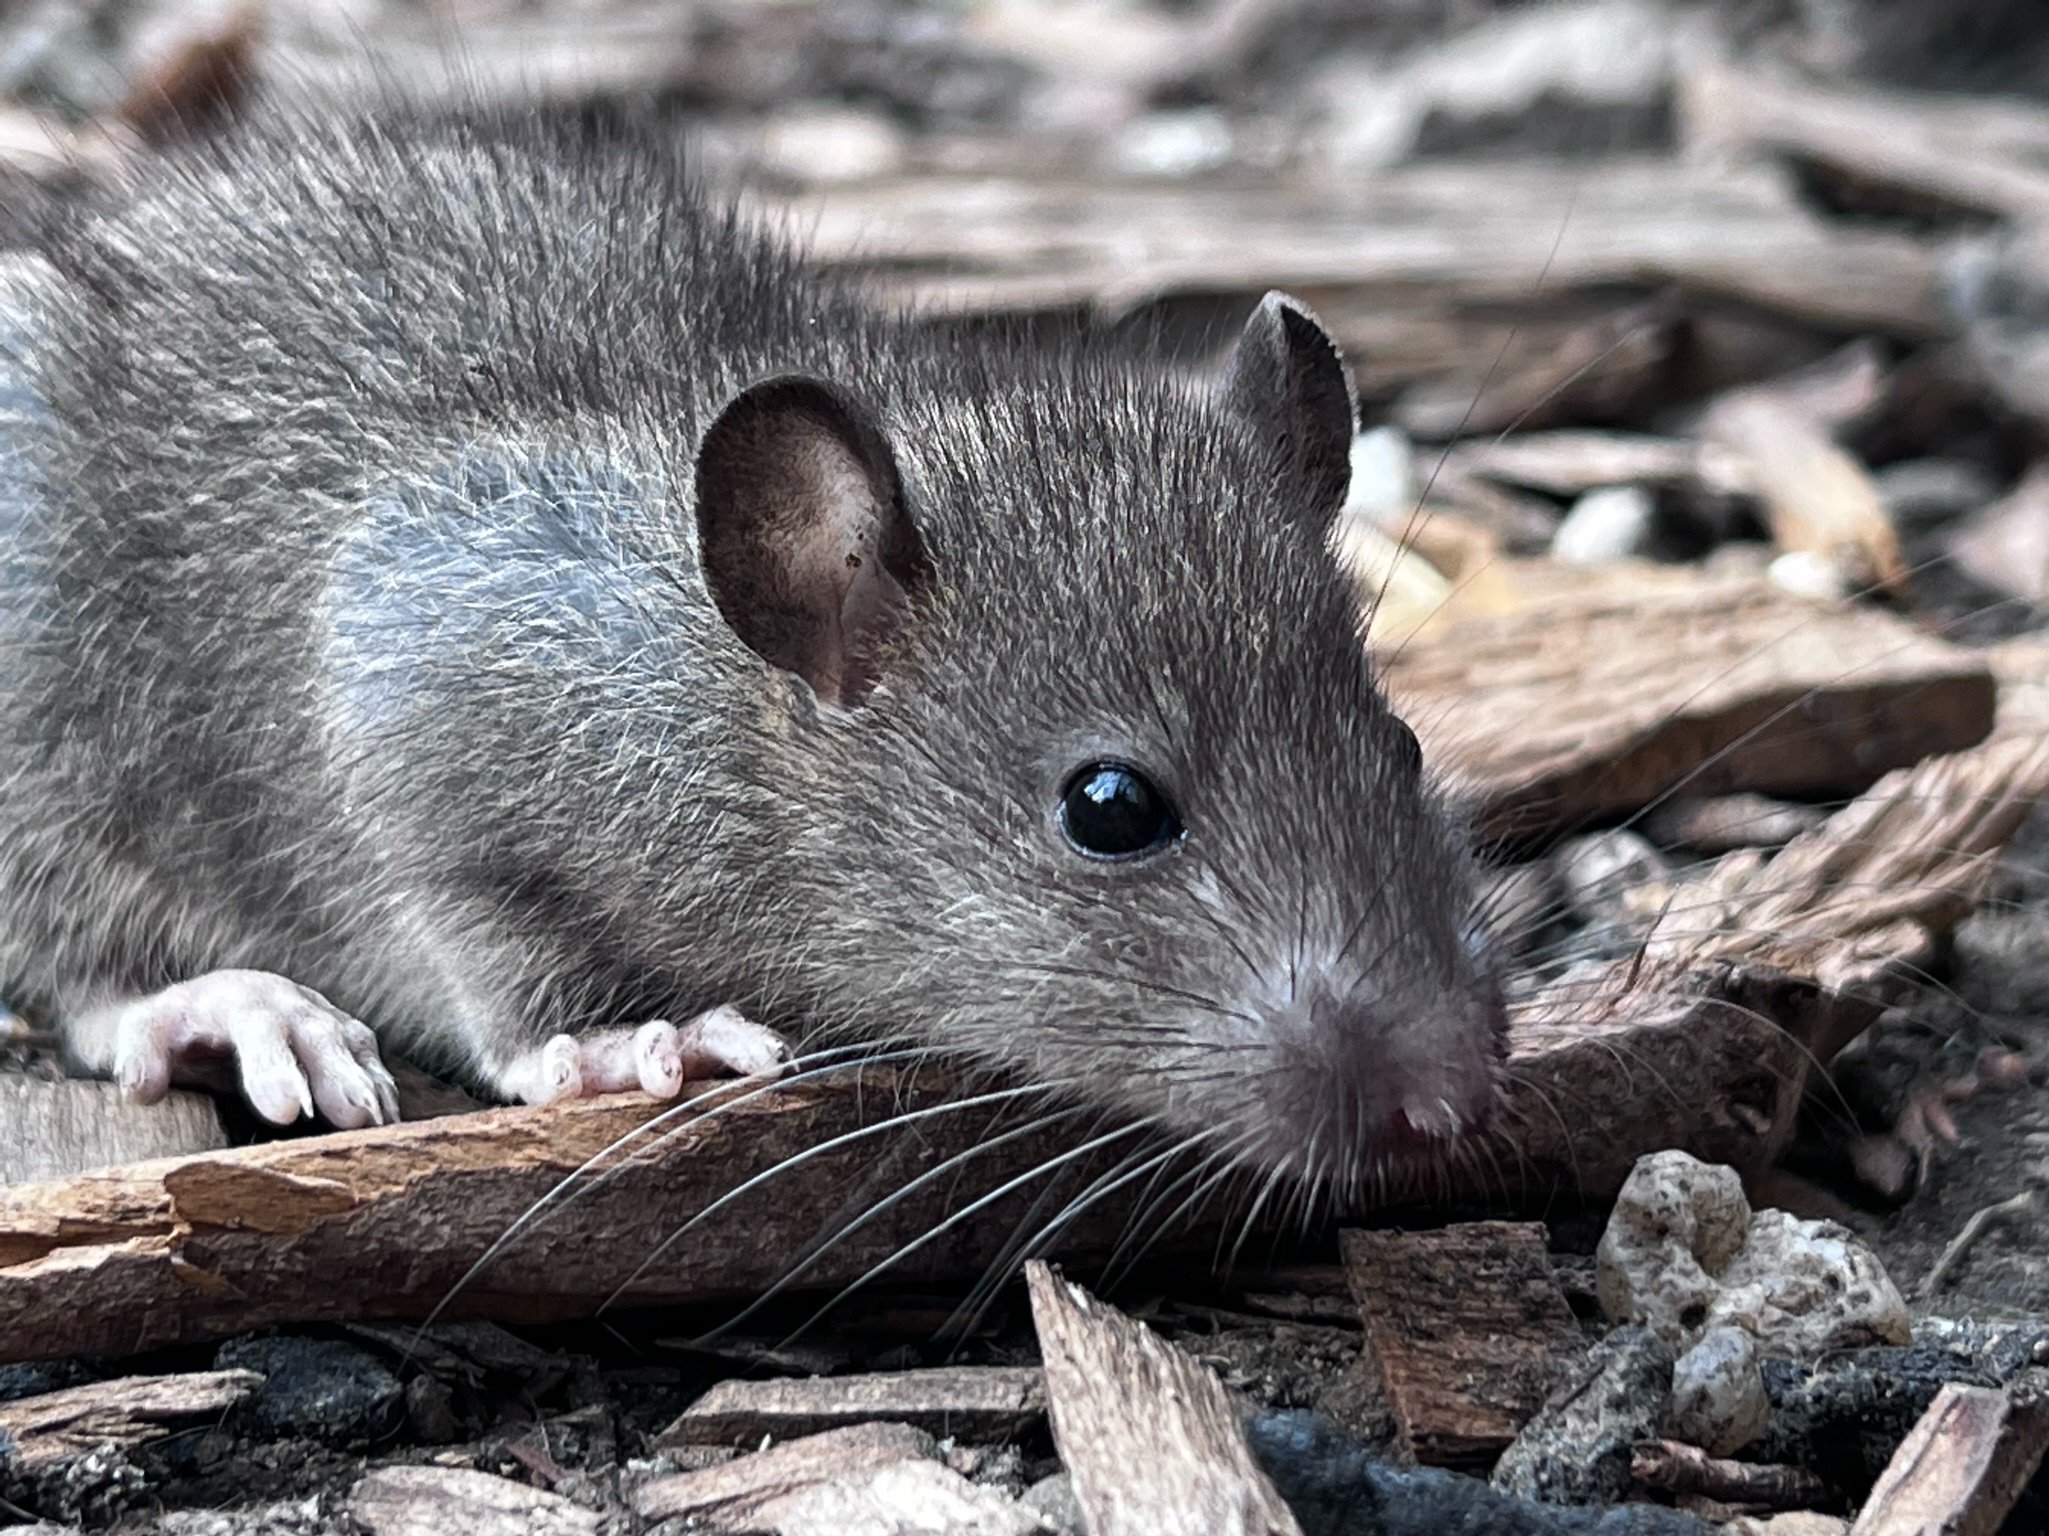 a lovely soft-focus portrait of a rat on mulch